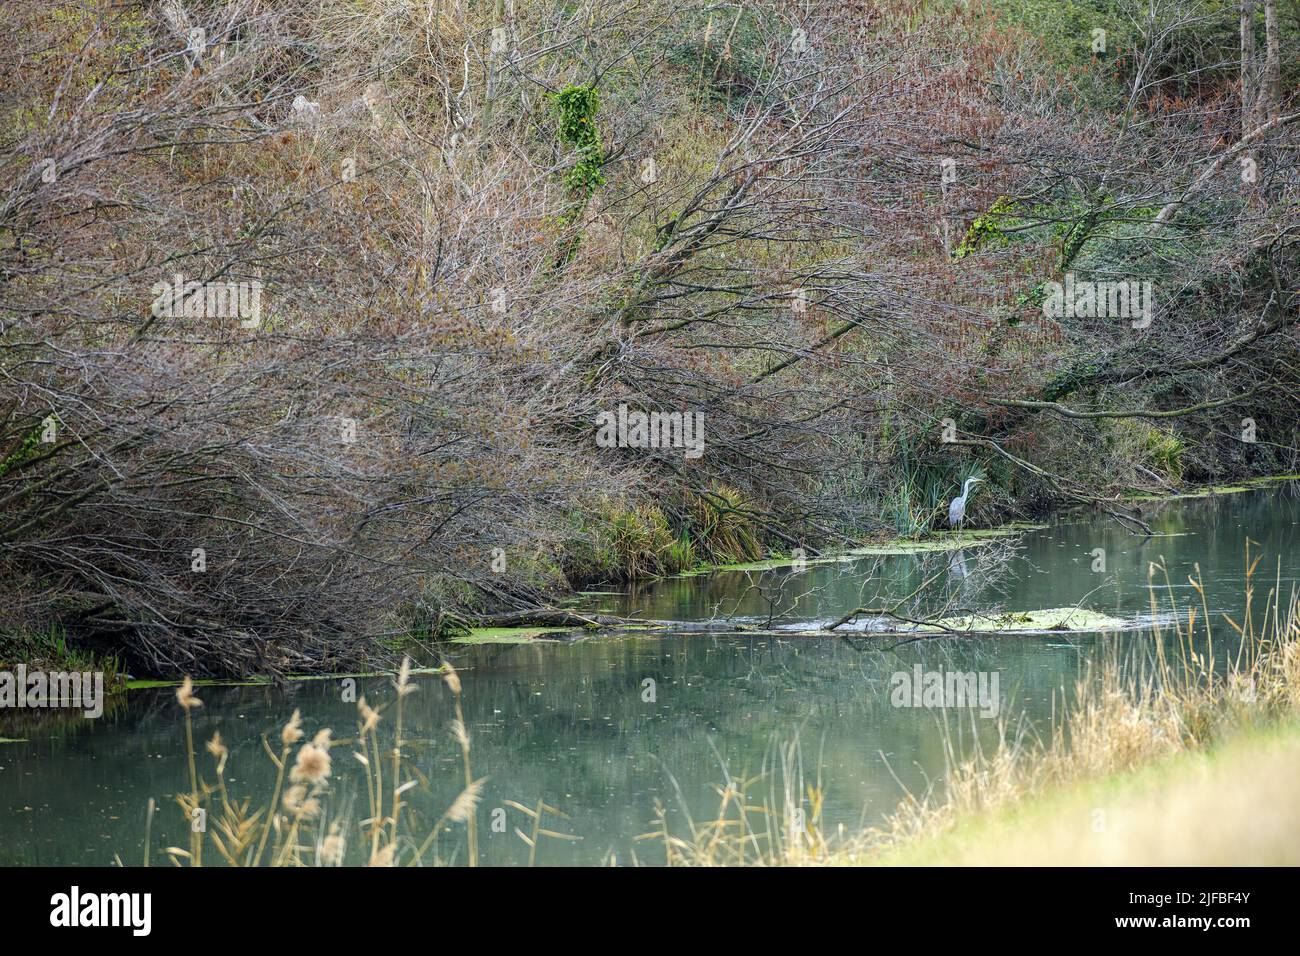 France, Vaucluse, Caderousse, tailrace canal of the Rhone, heron Stock Photo